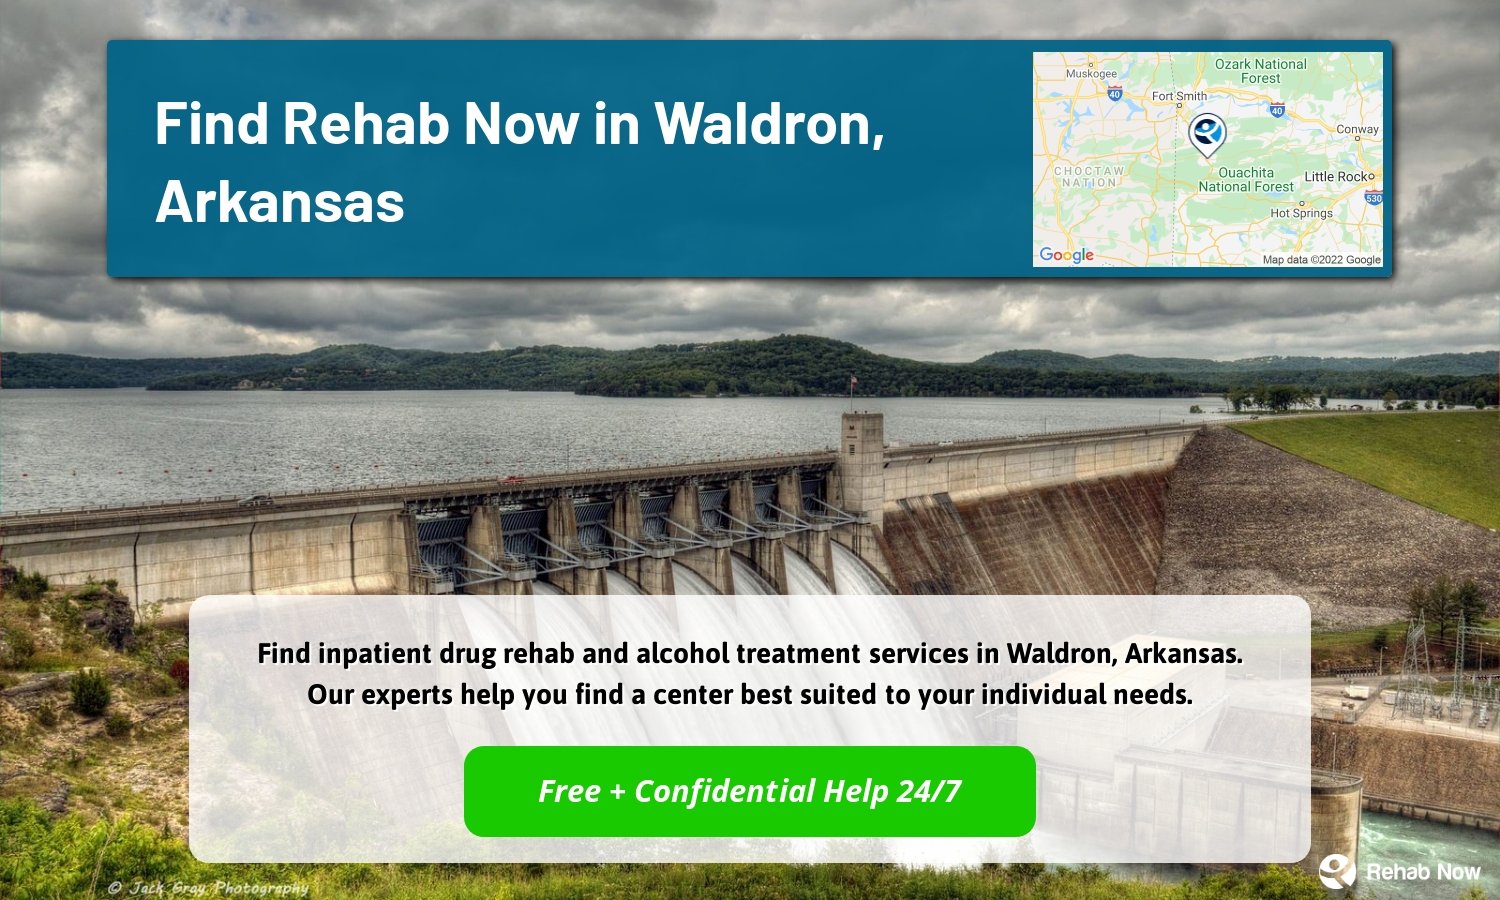 Find inpatient drug rehab and alcohol treatment services in Waldron, Arkansas. Our experts help you find a center best suited to your individual needs.